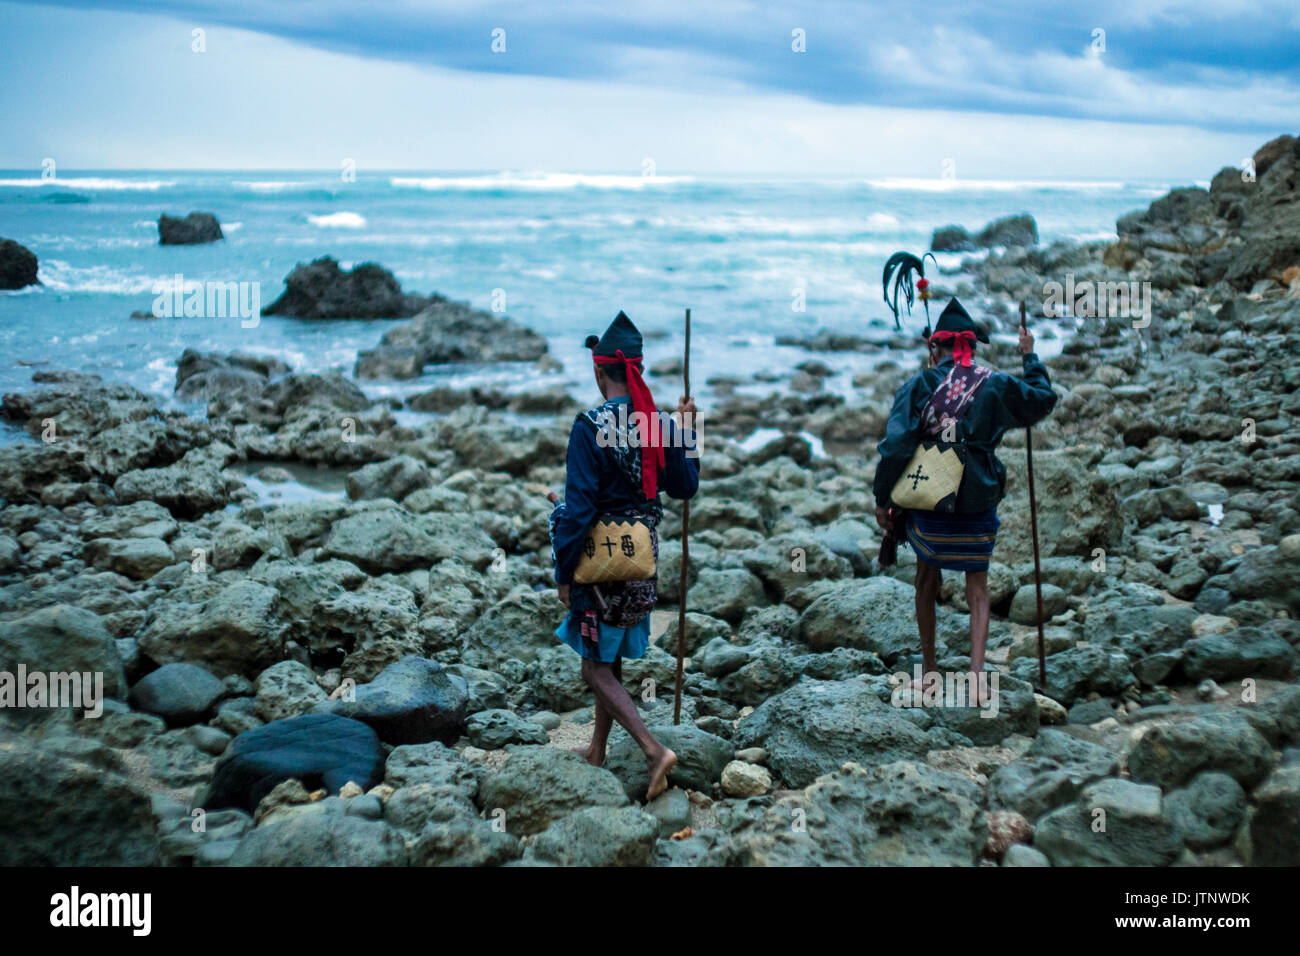 Two shamans with spears standing by ocean, Sumba Island, Indonesia Stock Photo